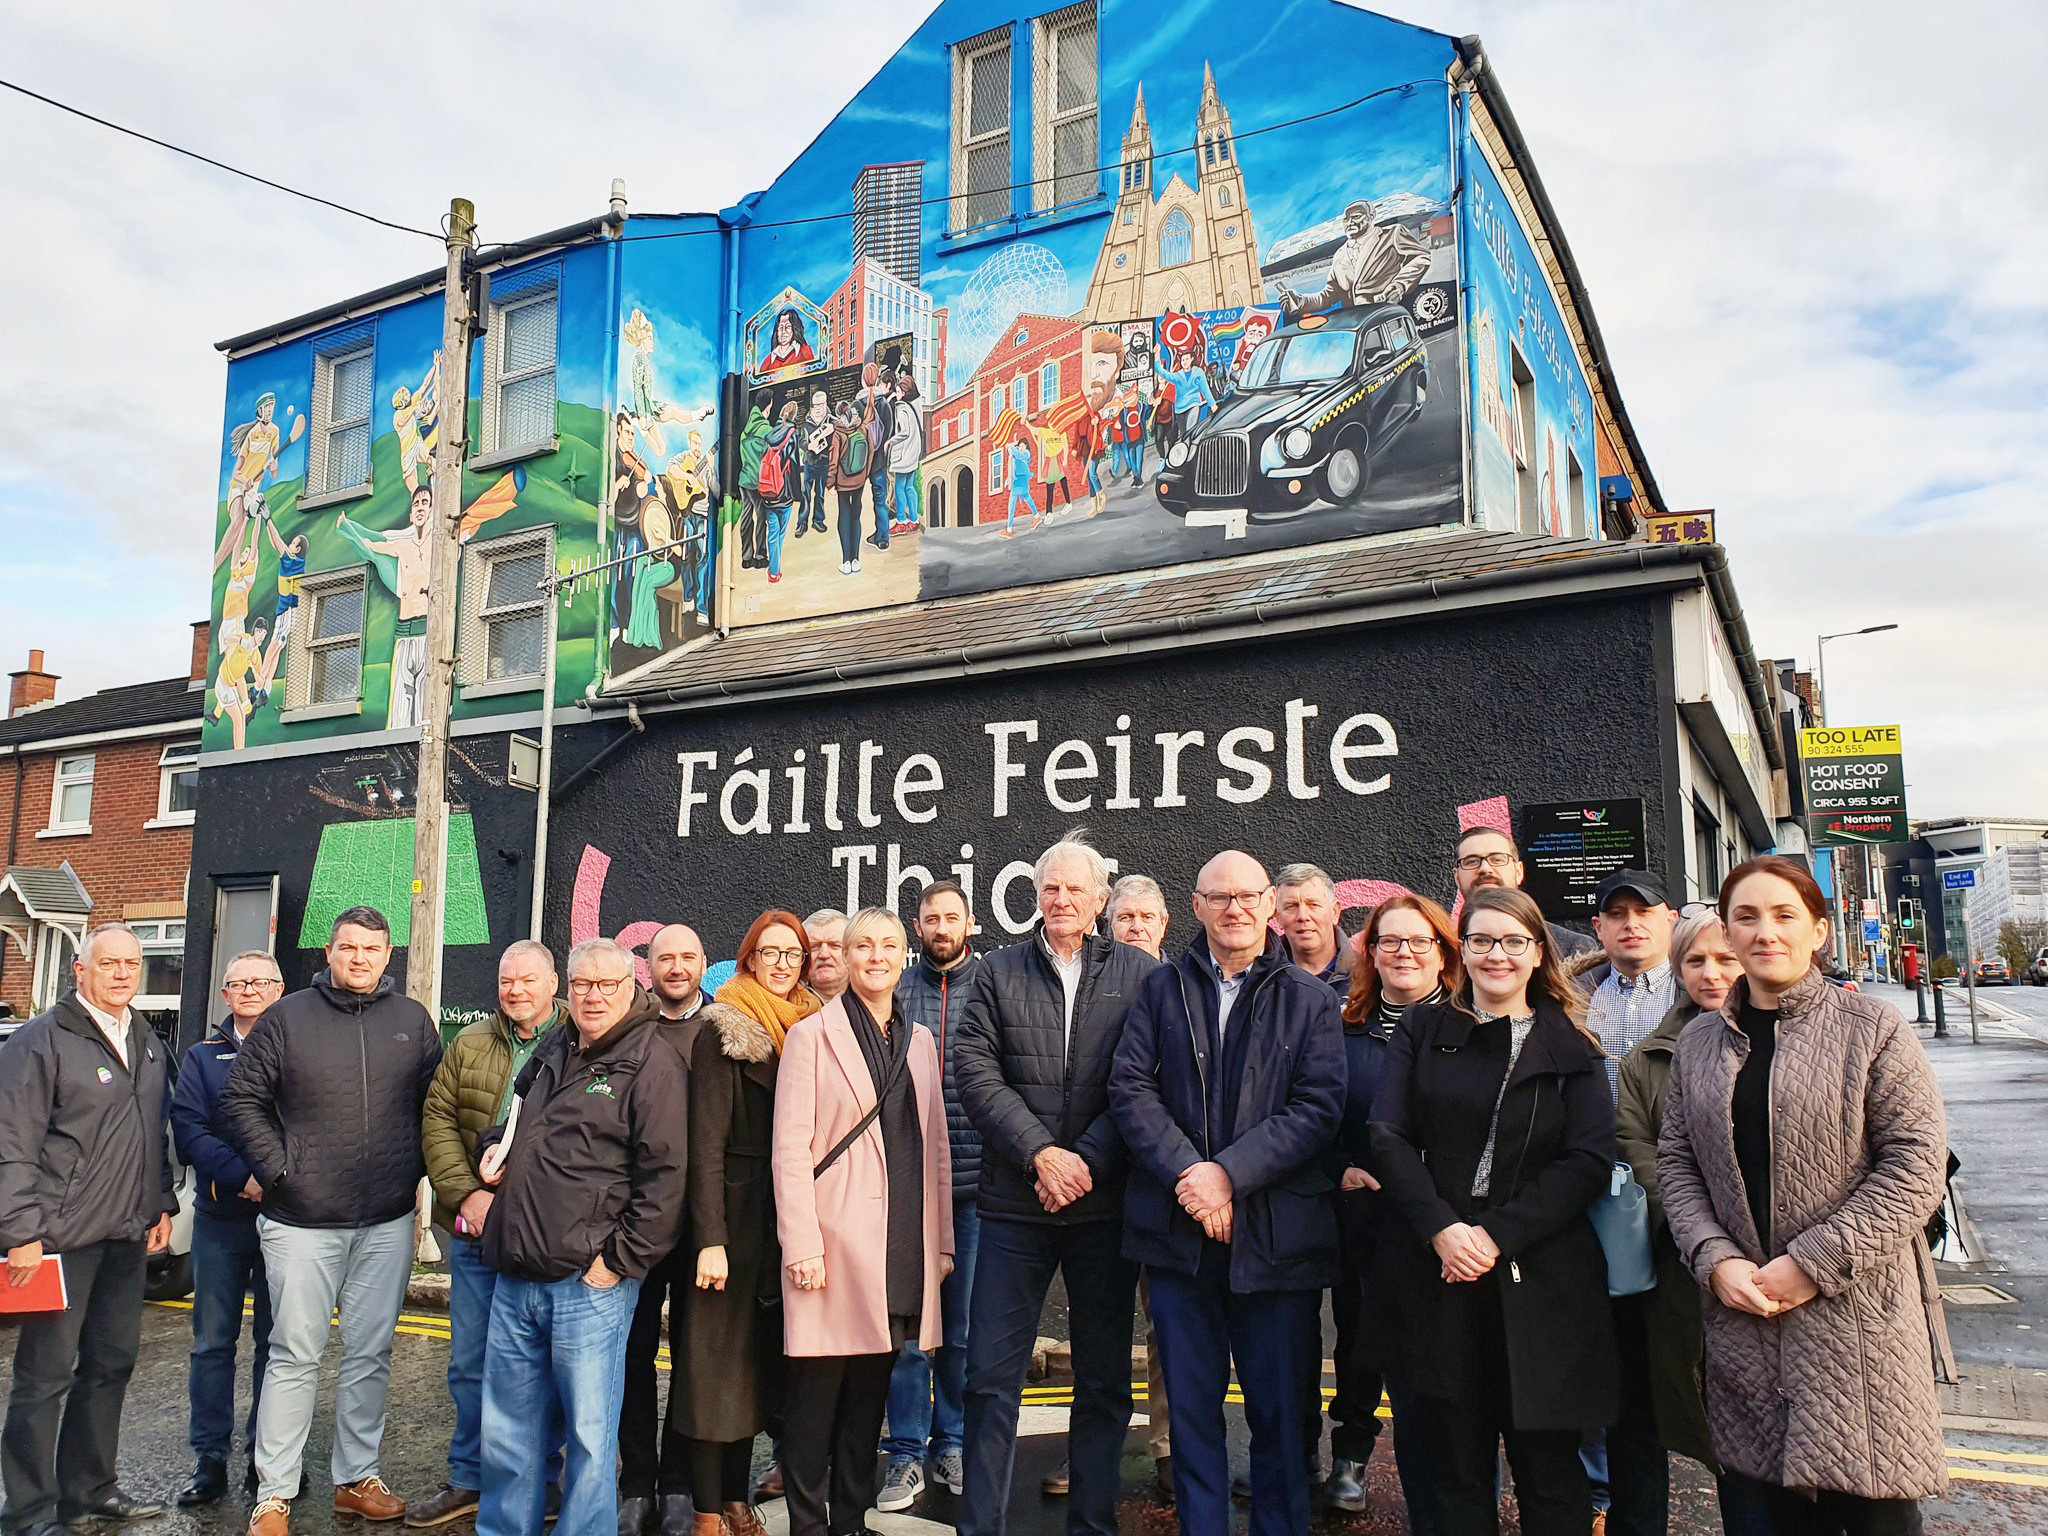 ON THE TOURISM TRAIL: Outside the Fáilte Feirste Thiar offices on the Falls Road